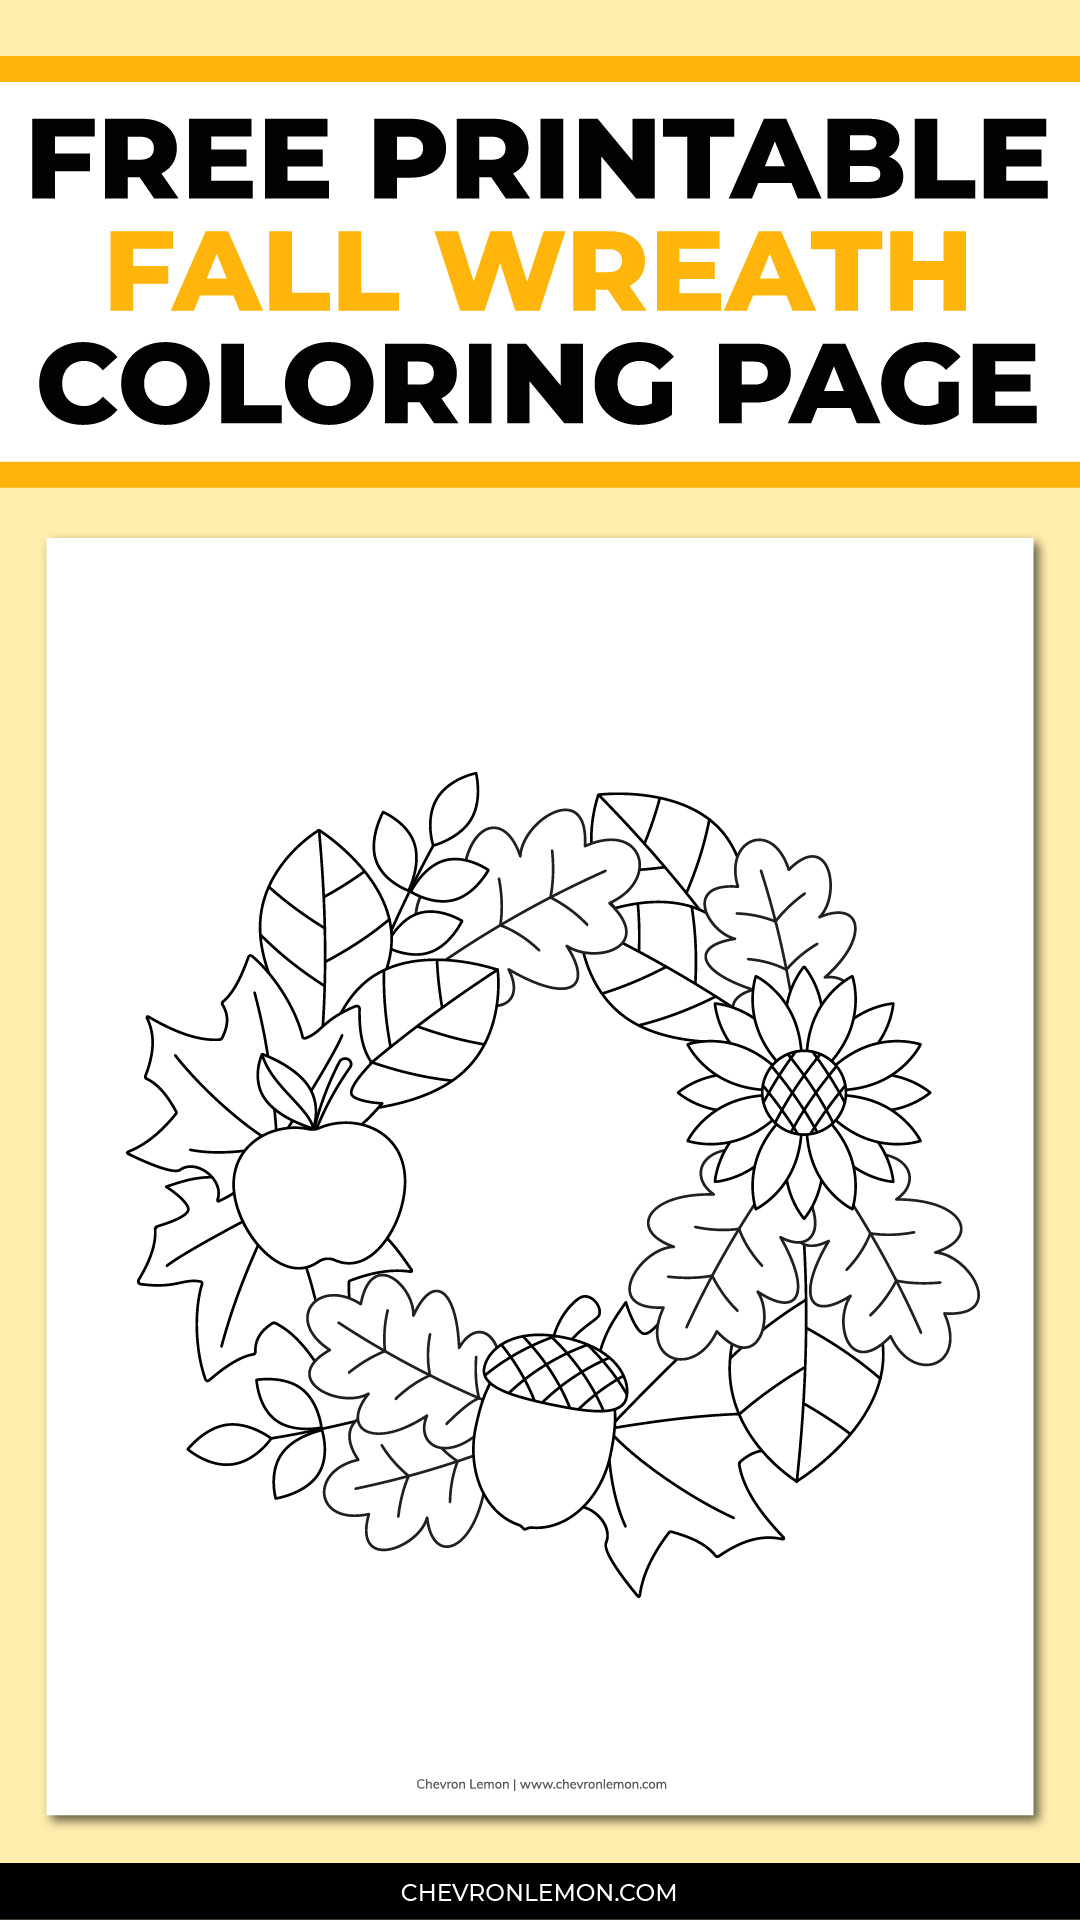 Free printable fall wreath coloring page